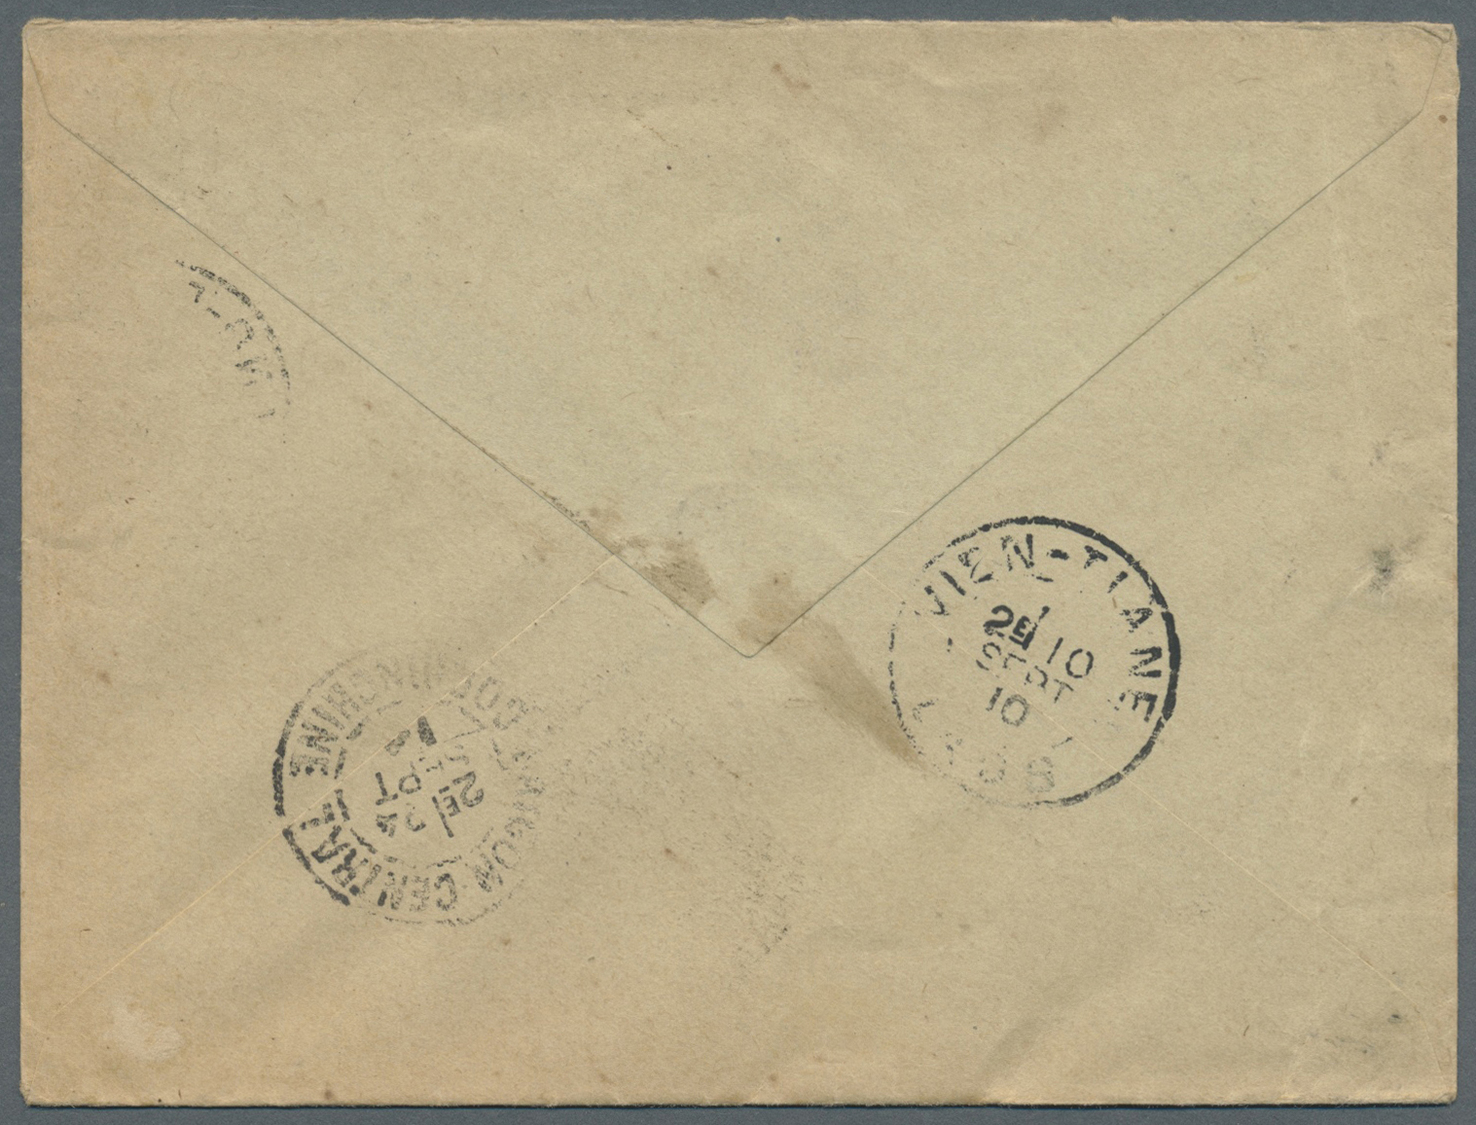 GA Laos: 1910. French Indo-China Postal Stationery Envelope 'Type Annamite' 10c Red Cancelled By Luang-Prabang/Laos Doub - Laos